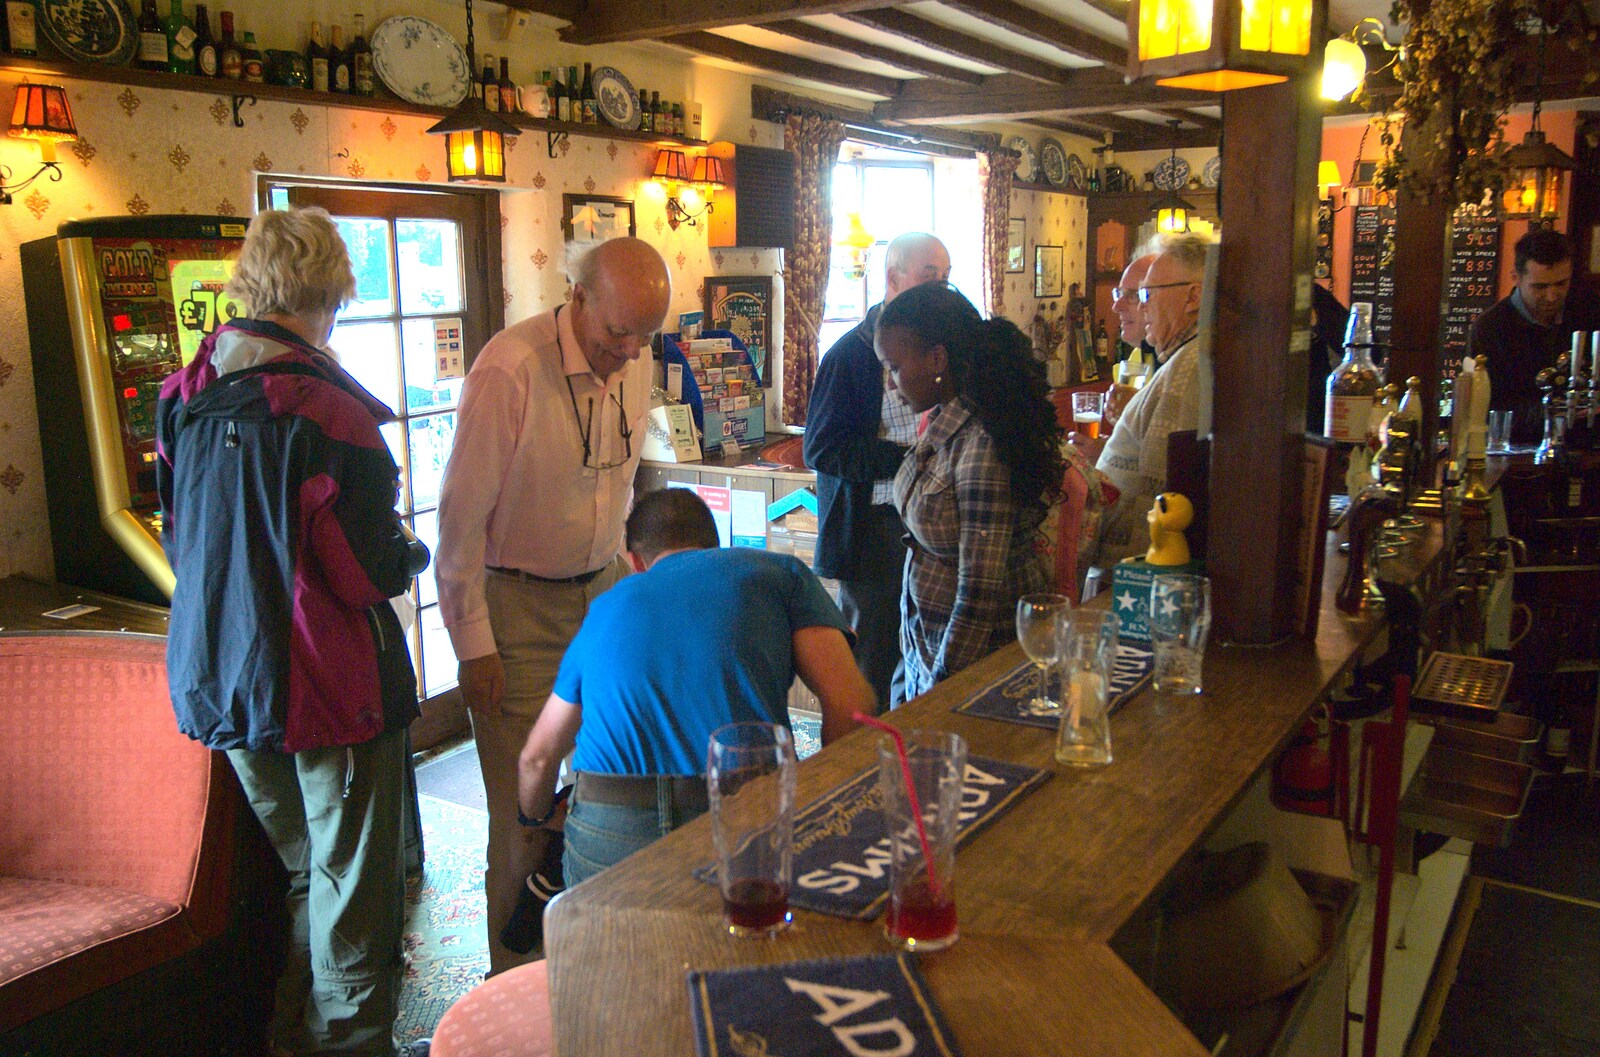 We retire inside the Swan from The Tour of Britain, Brome, Suffolk - 17th September 2011